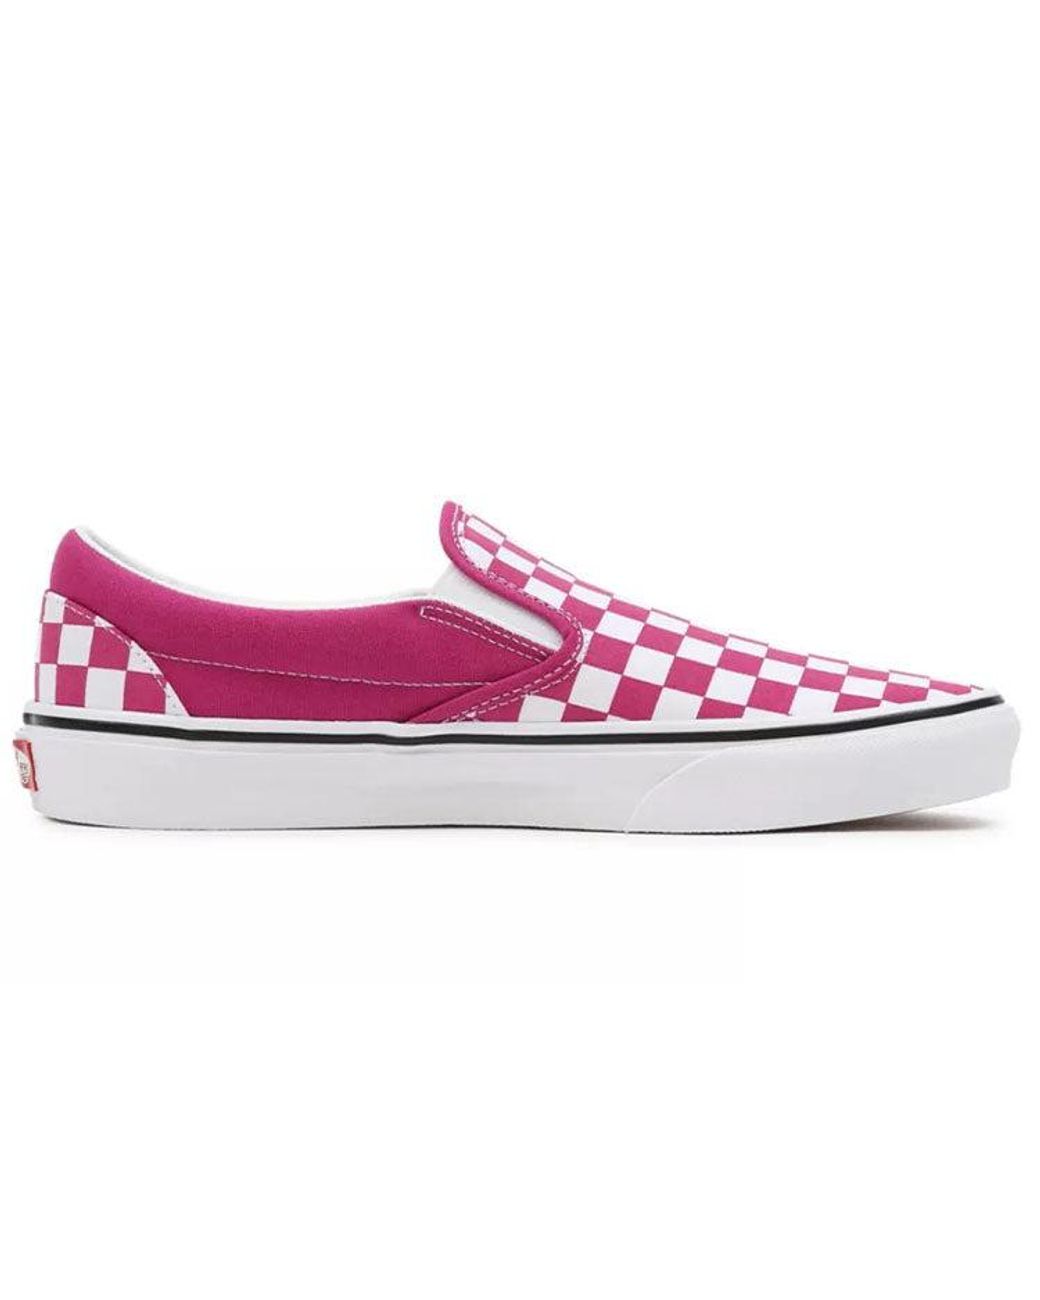 Vans Checkerboard Classic Slip-on Shoes Fuchsia/white in Pink | Lyst